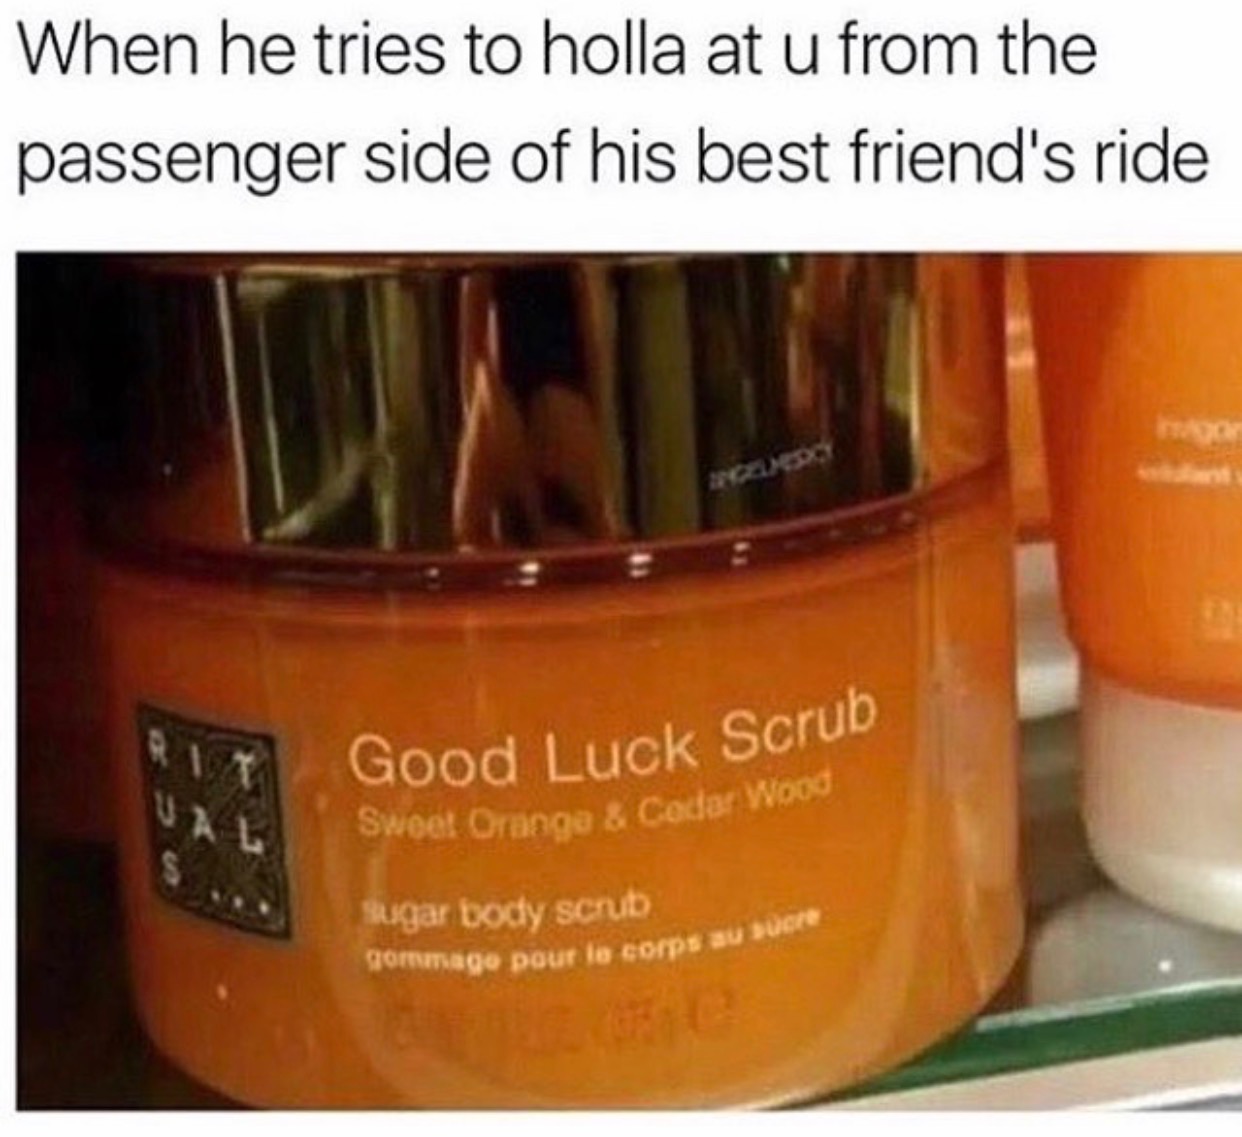 he tries to holla at you - When he tries to holla at u from the passenger side of his best friend's ride Good Luck Scrub Sweet Omnga & Cocar wou sugar body scrub gommage pour le corps